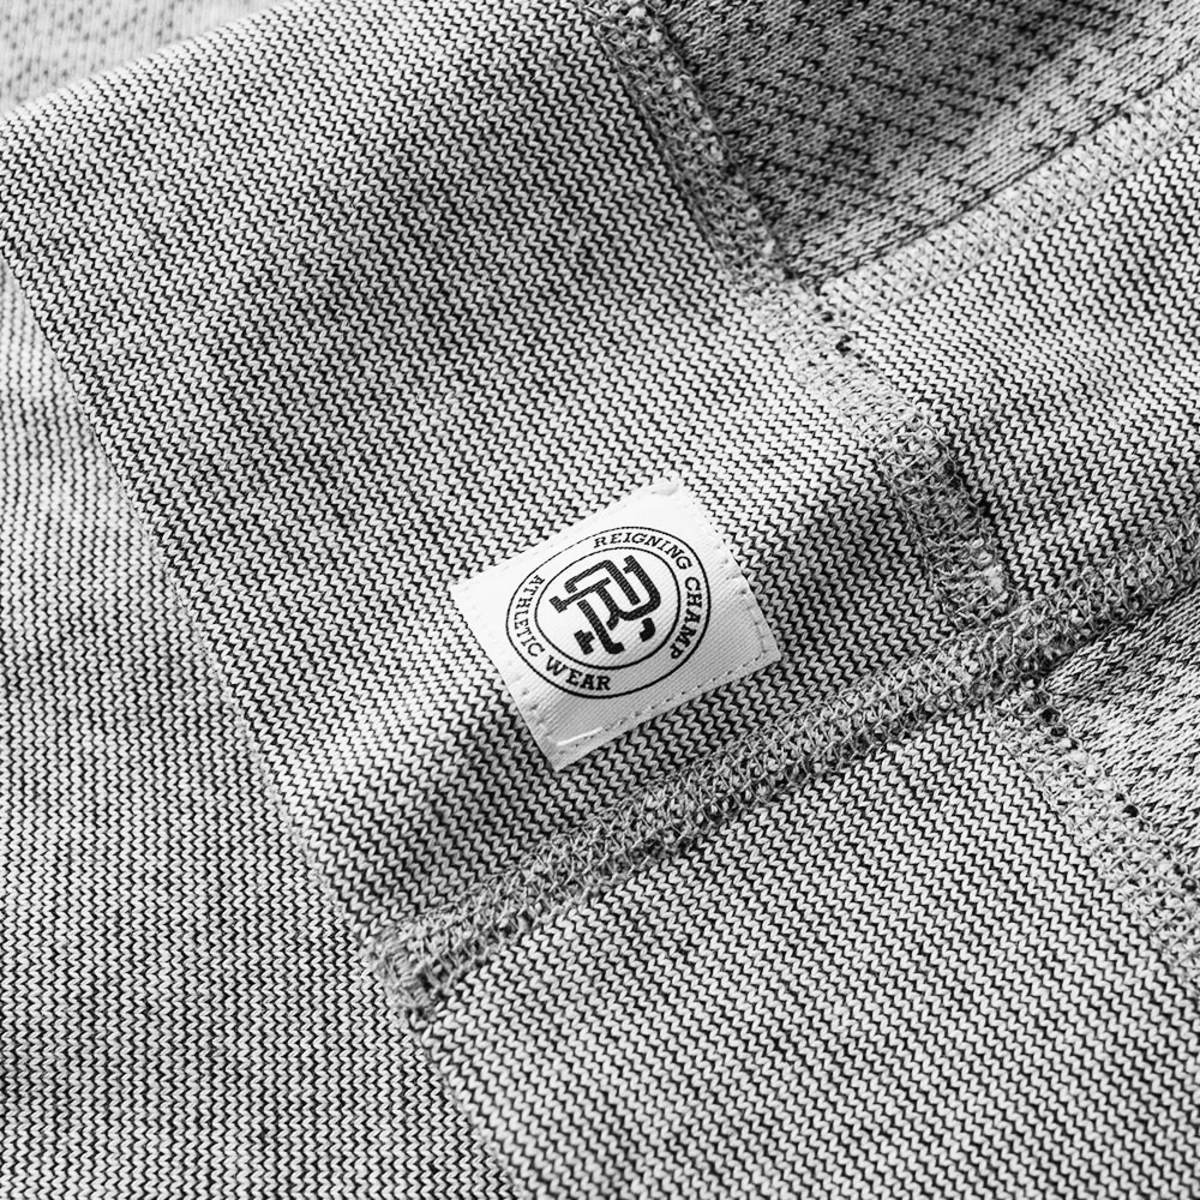 Reigning Champ's Tiger Fleece Essentials Just Went On Sale - Airows